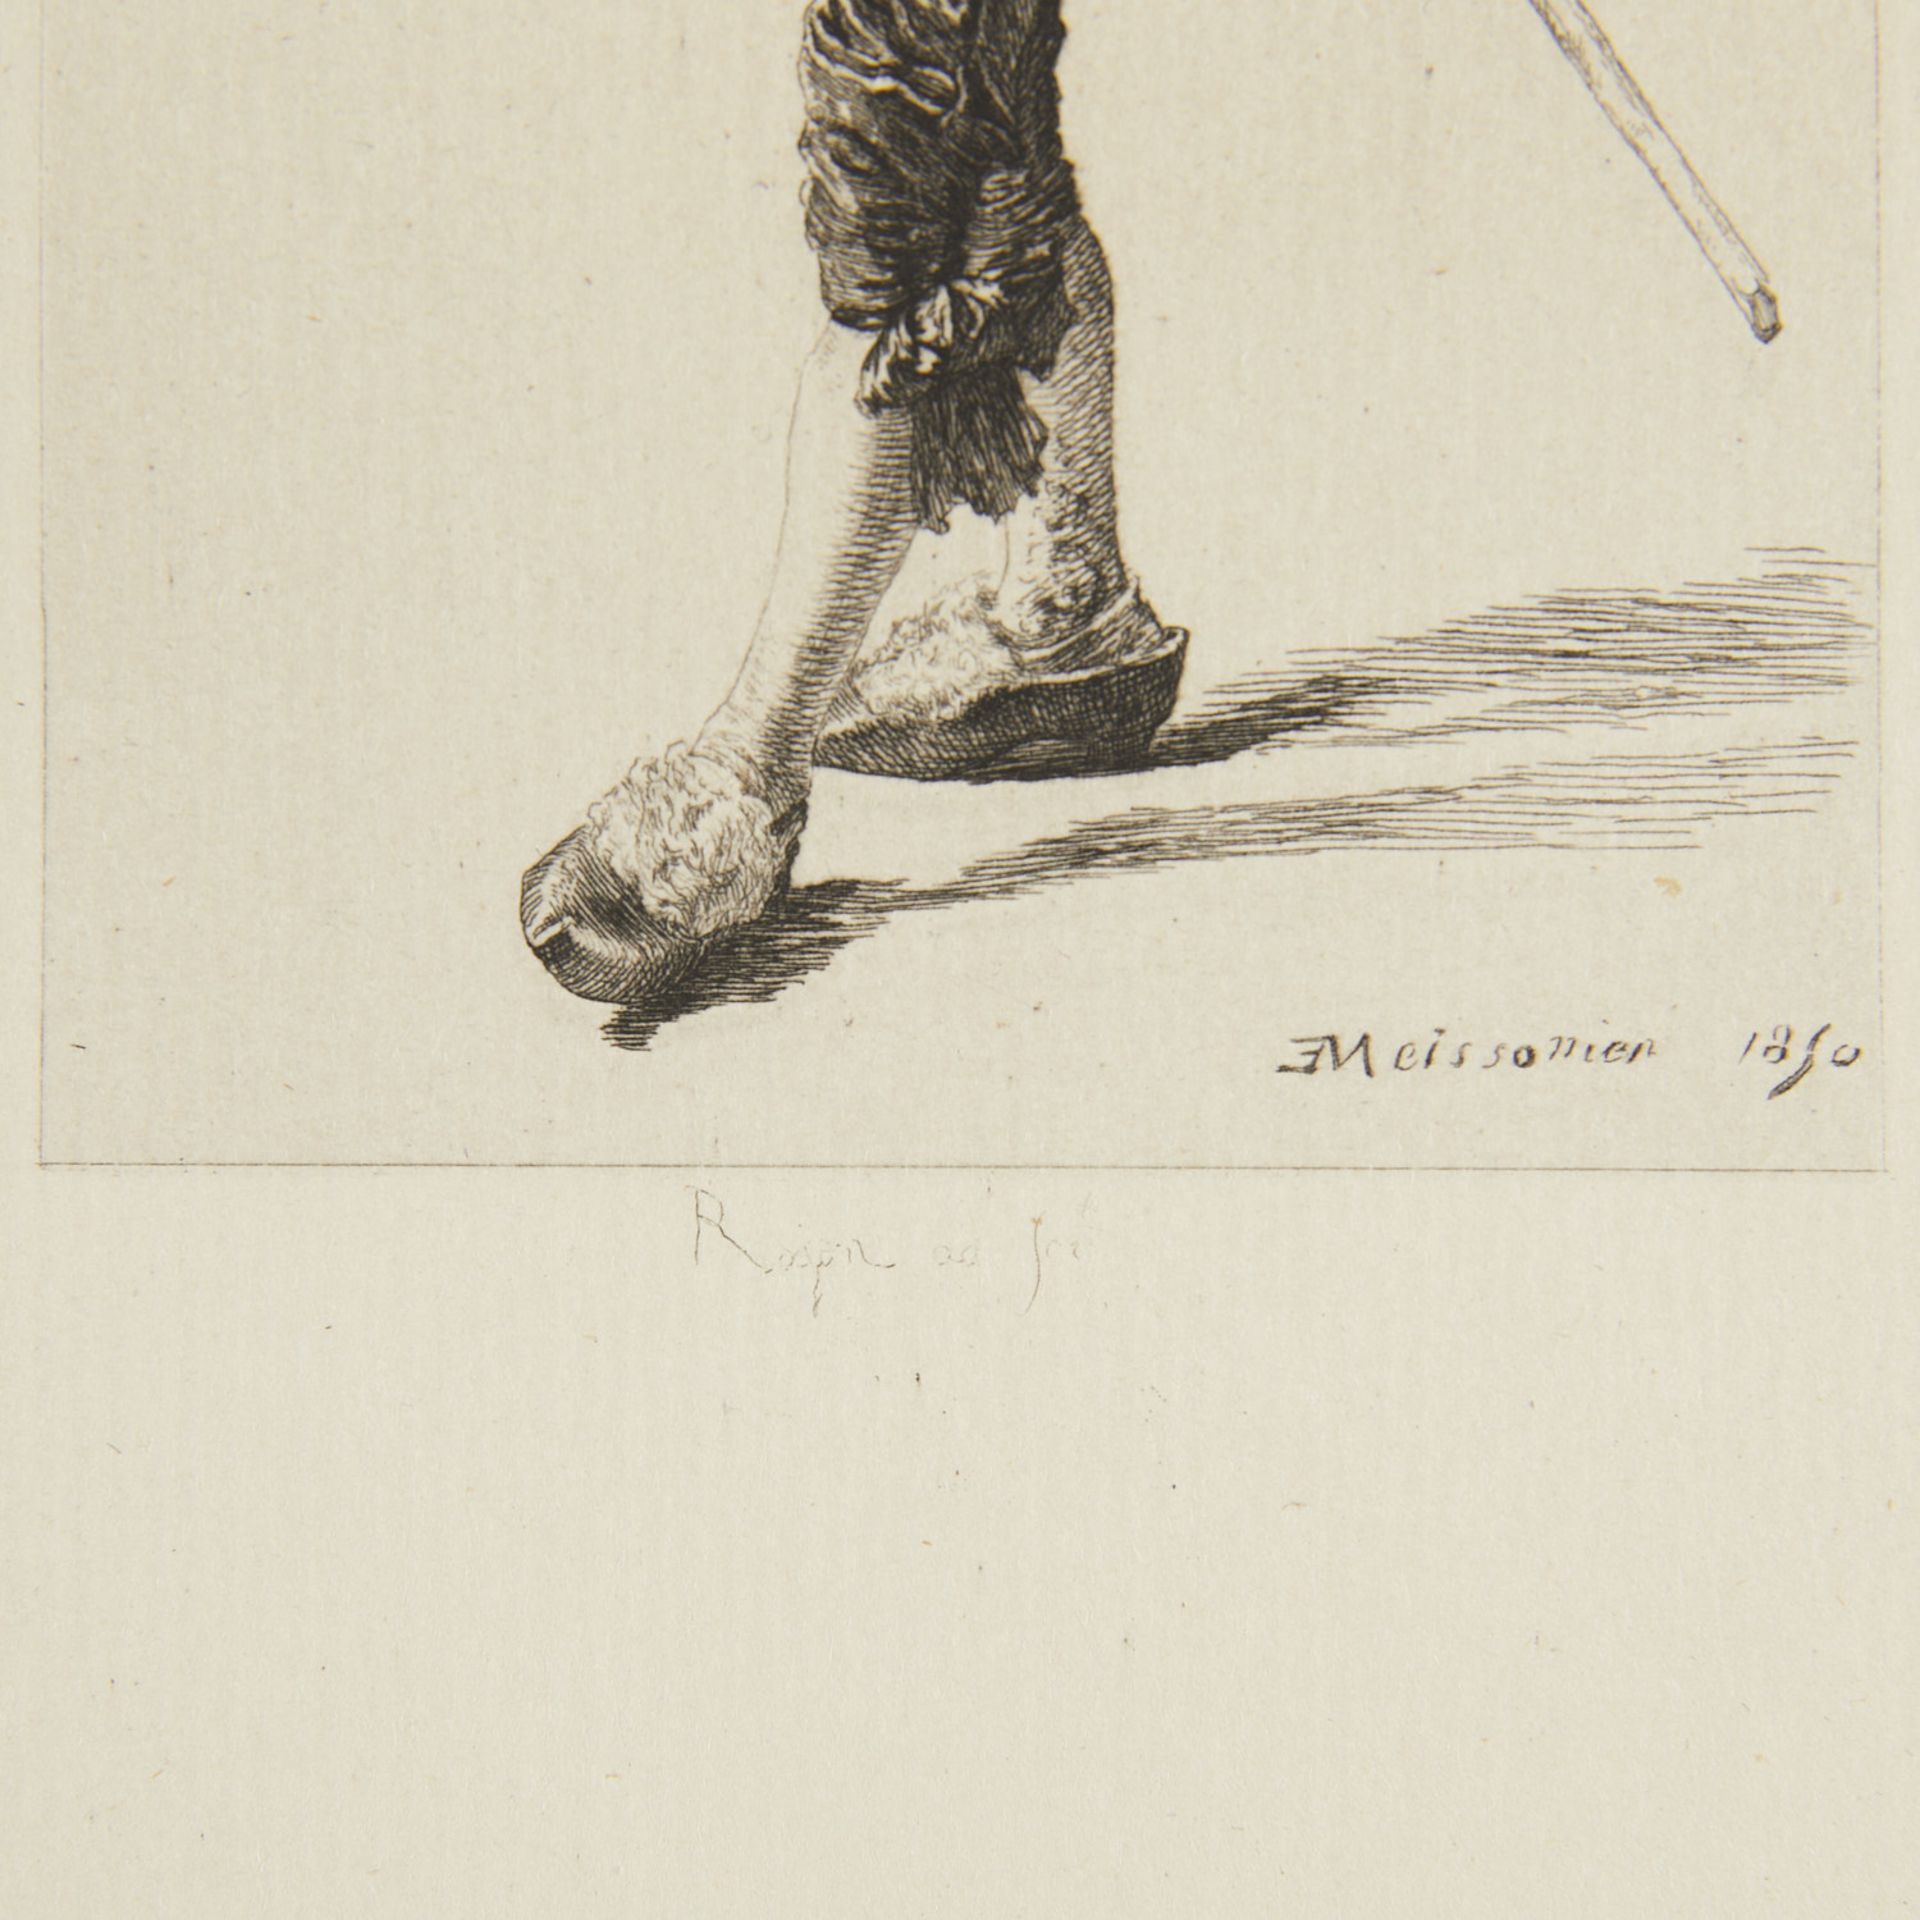 Rajon "Punchinello" Etching After Meissonier - Image 2 of 5